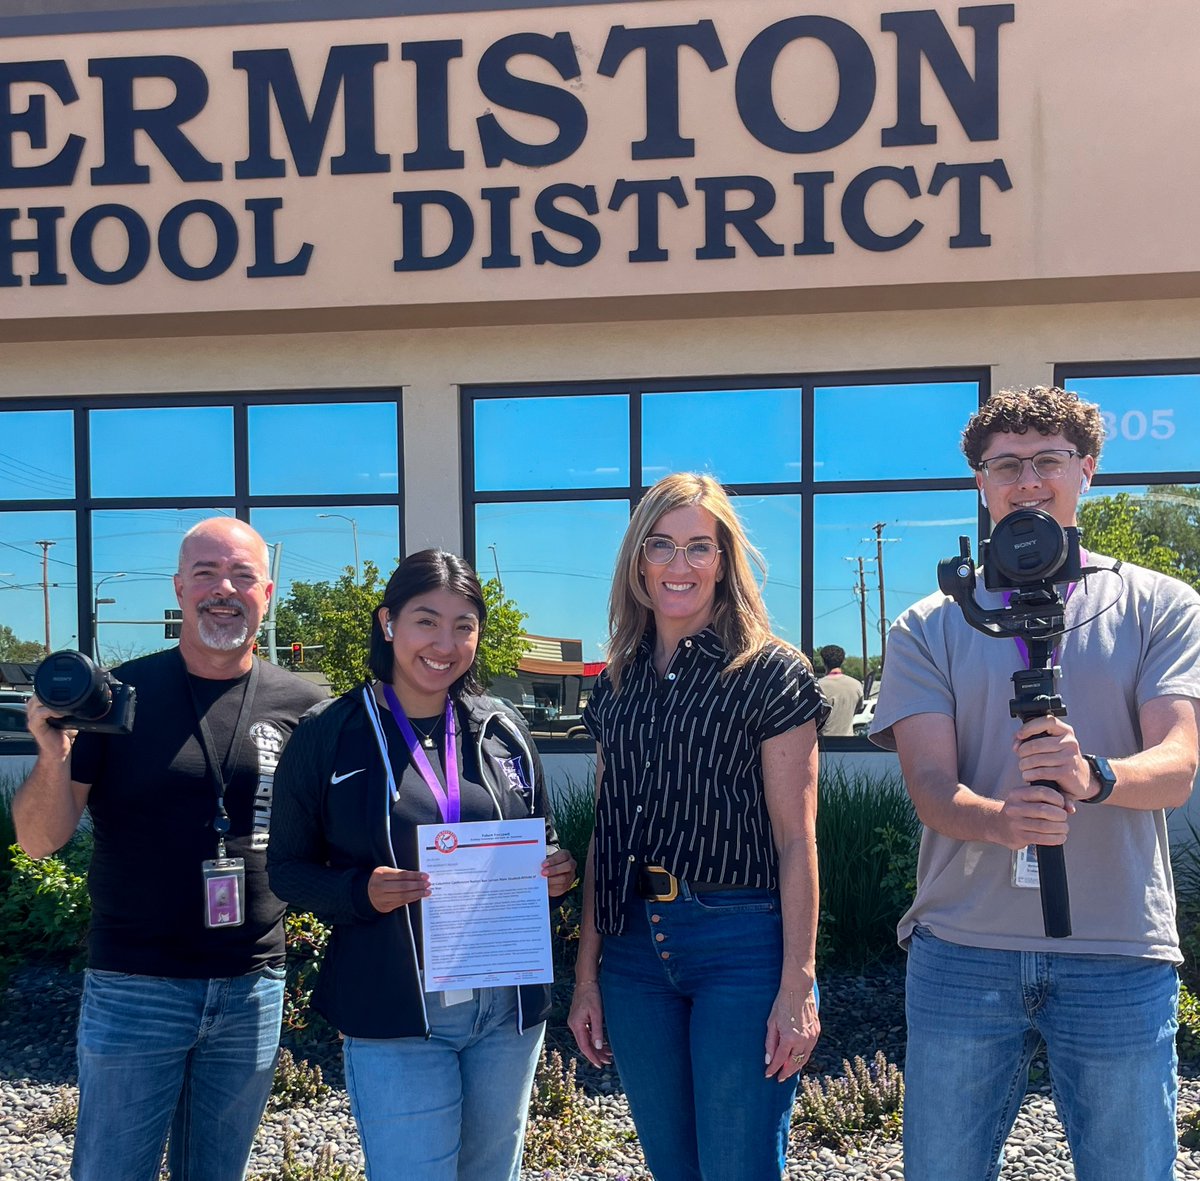 Happy School Communicators Day to the amazing communications team at the Hermiston School District! Thank you for keeping us informed, engaged, and connected!